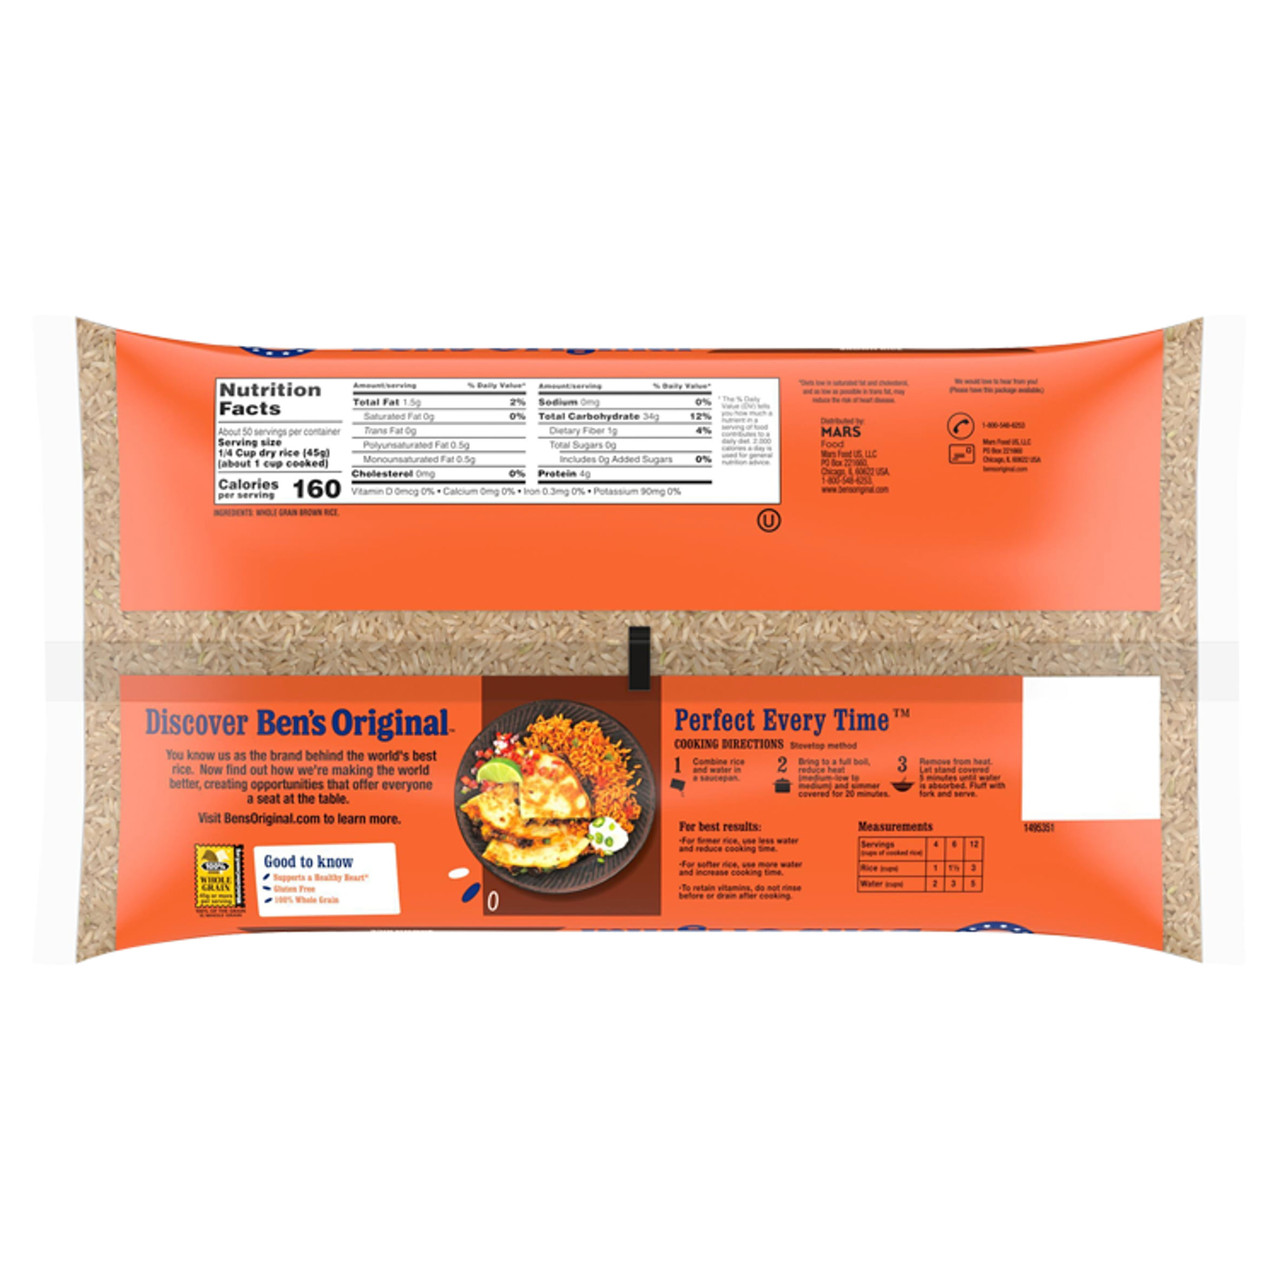 BEN'S ORIGINAL Whole Grain Brown Rice, 5 LB Bag - [From 37.00 - Choose pk Qty ] - *Ships from Miami